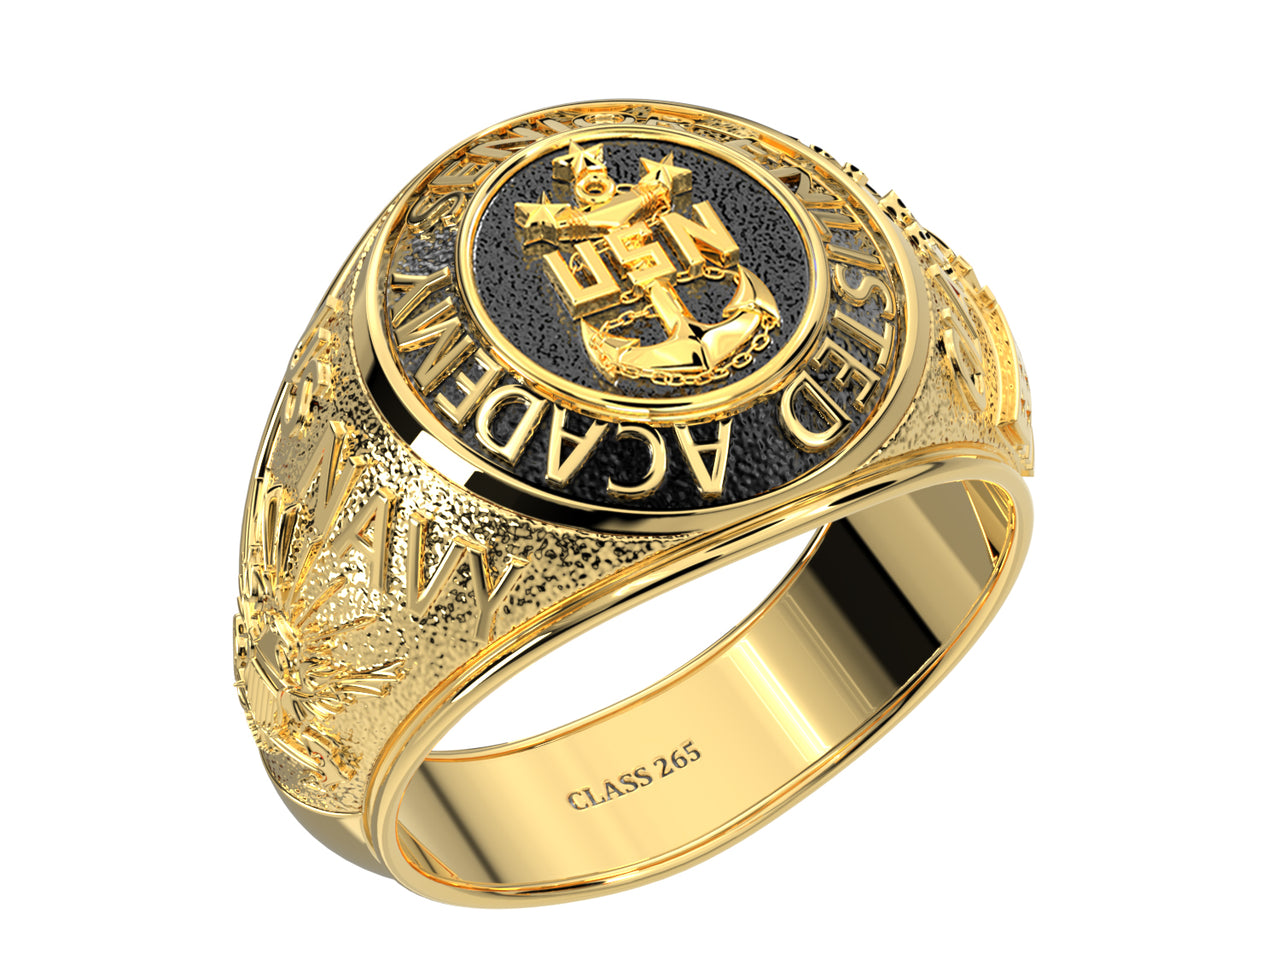 Men's or Ladies Customizable Senior Enlisted Academy Class Ring CPO1893